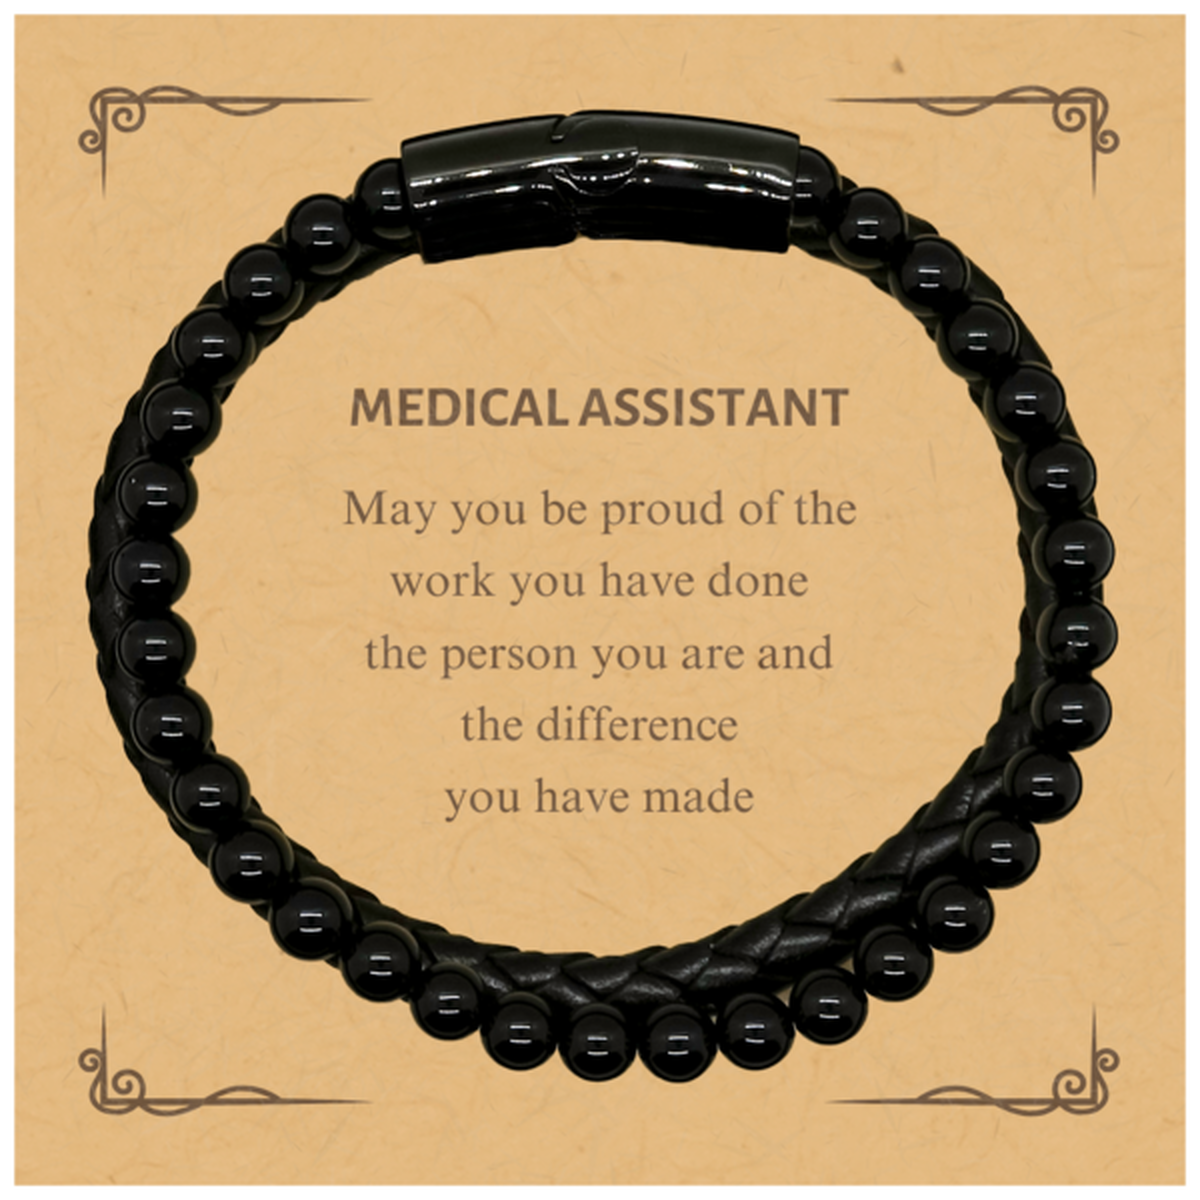 Medical Assistant May you be proud of the work you have done, Retirement Medical Assistant Stone Leather Bracelets for Colleague Appreciation Gifts Amazing for Medical Assistant